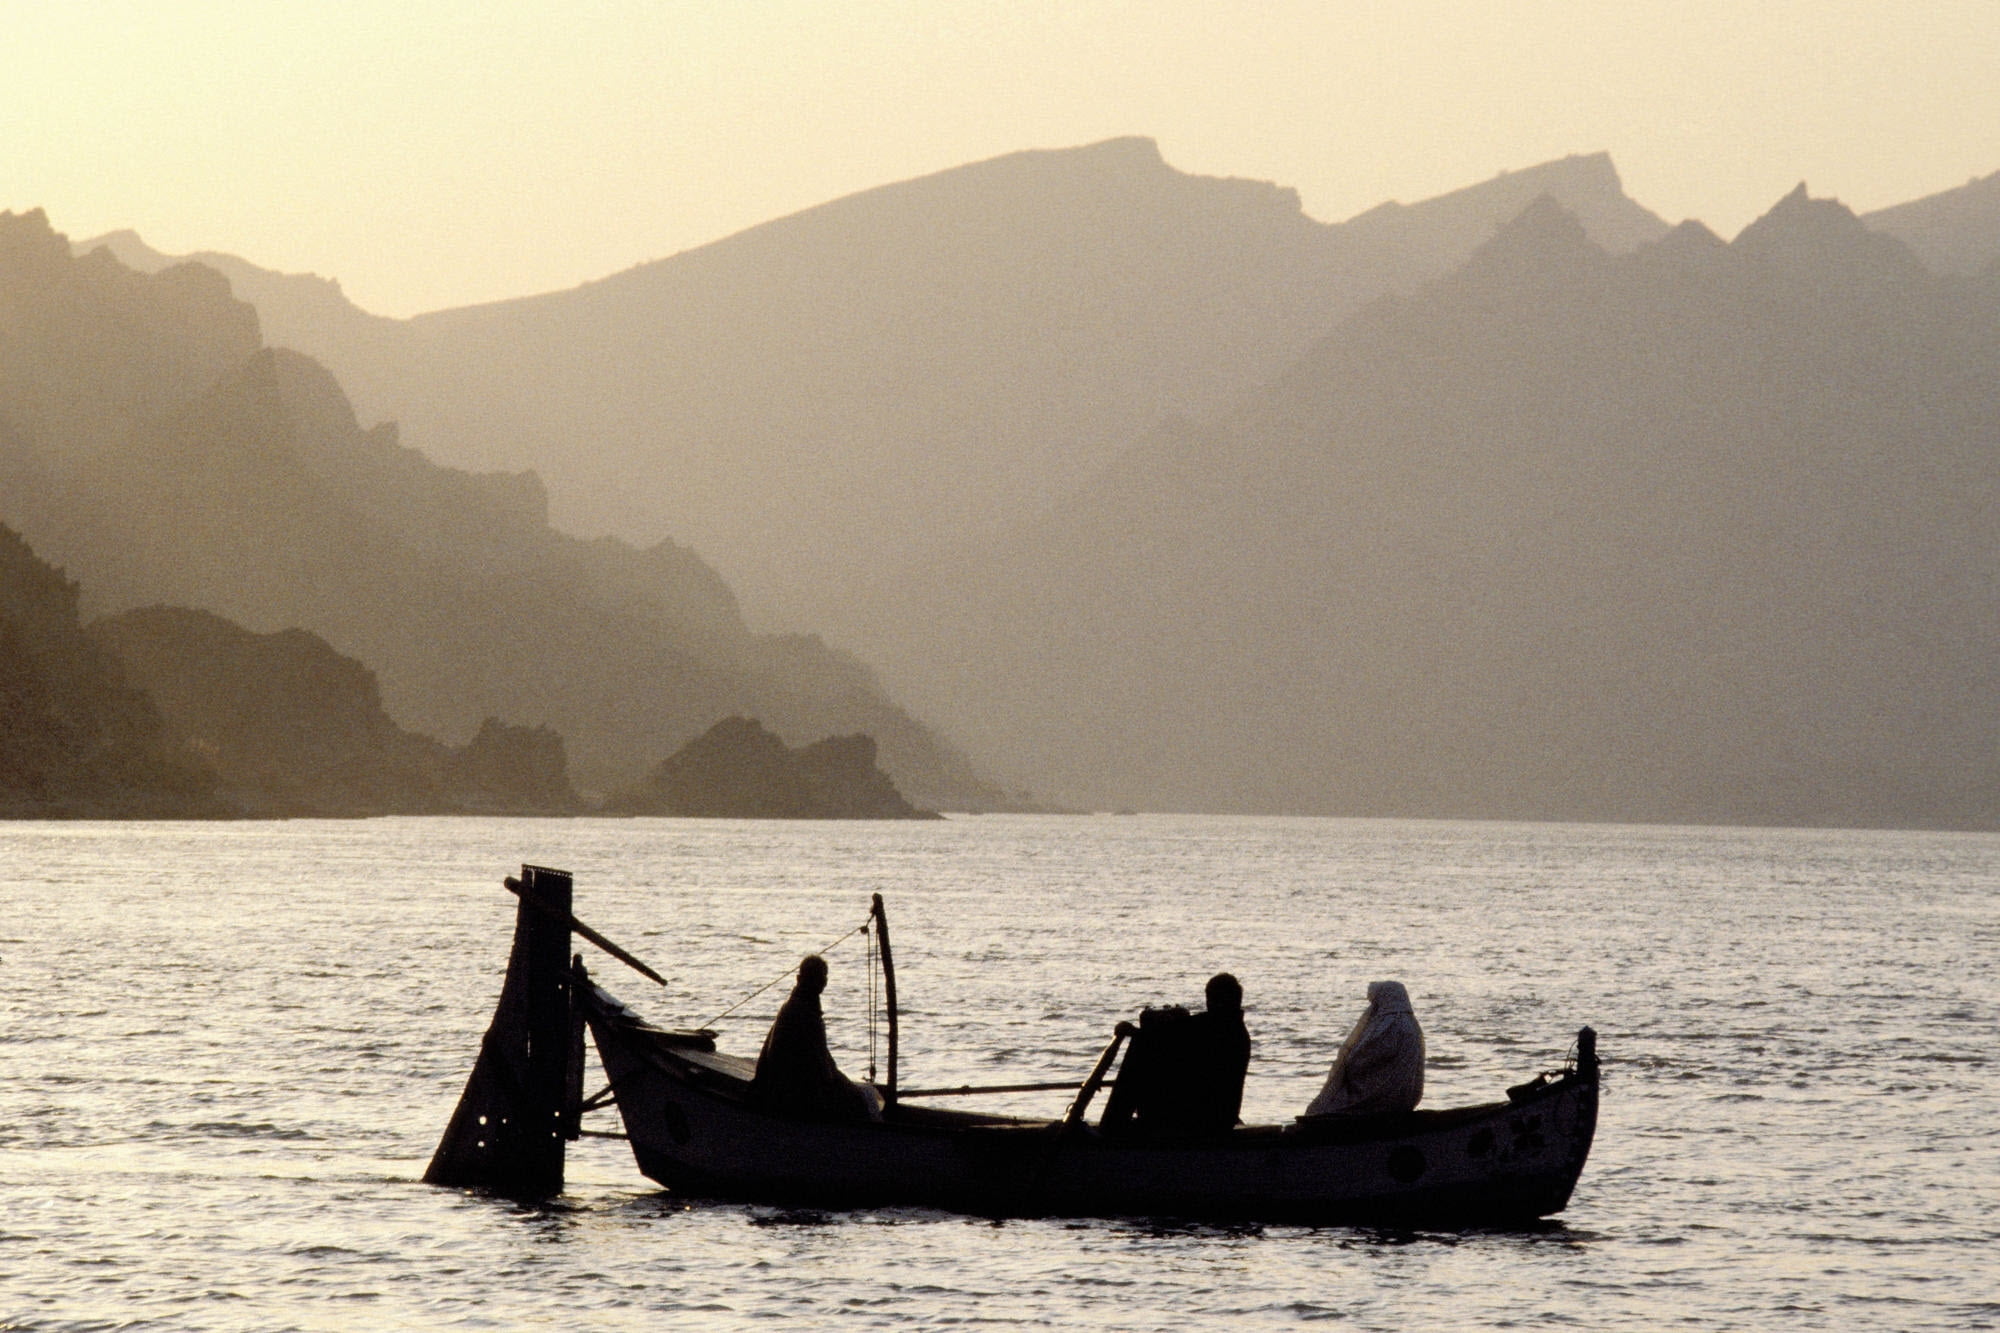 silhouette of boat, asia, mountains, fog, water, lake, people